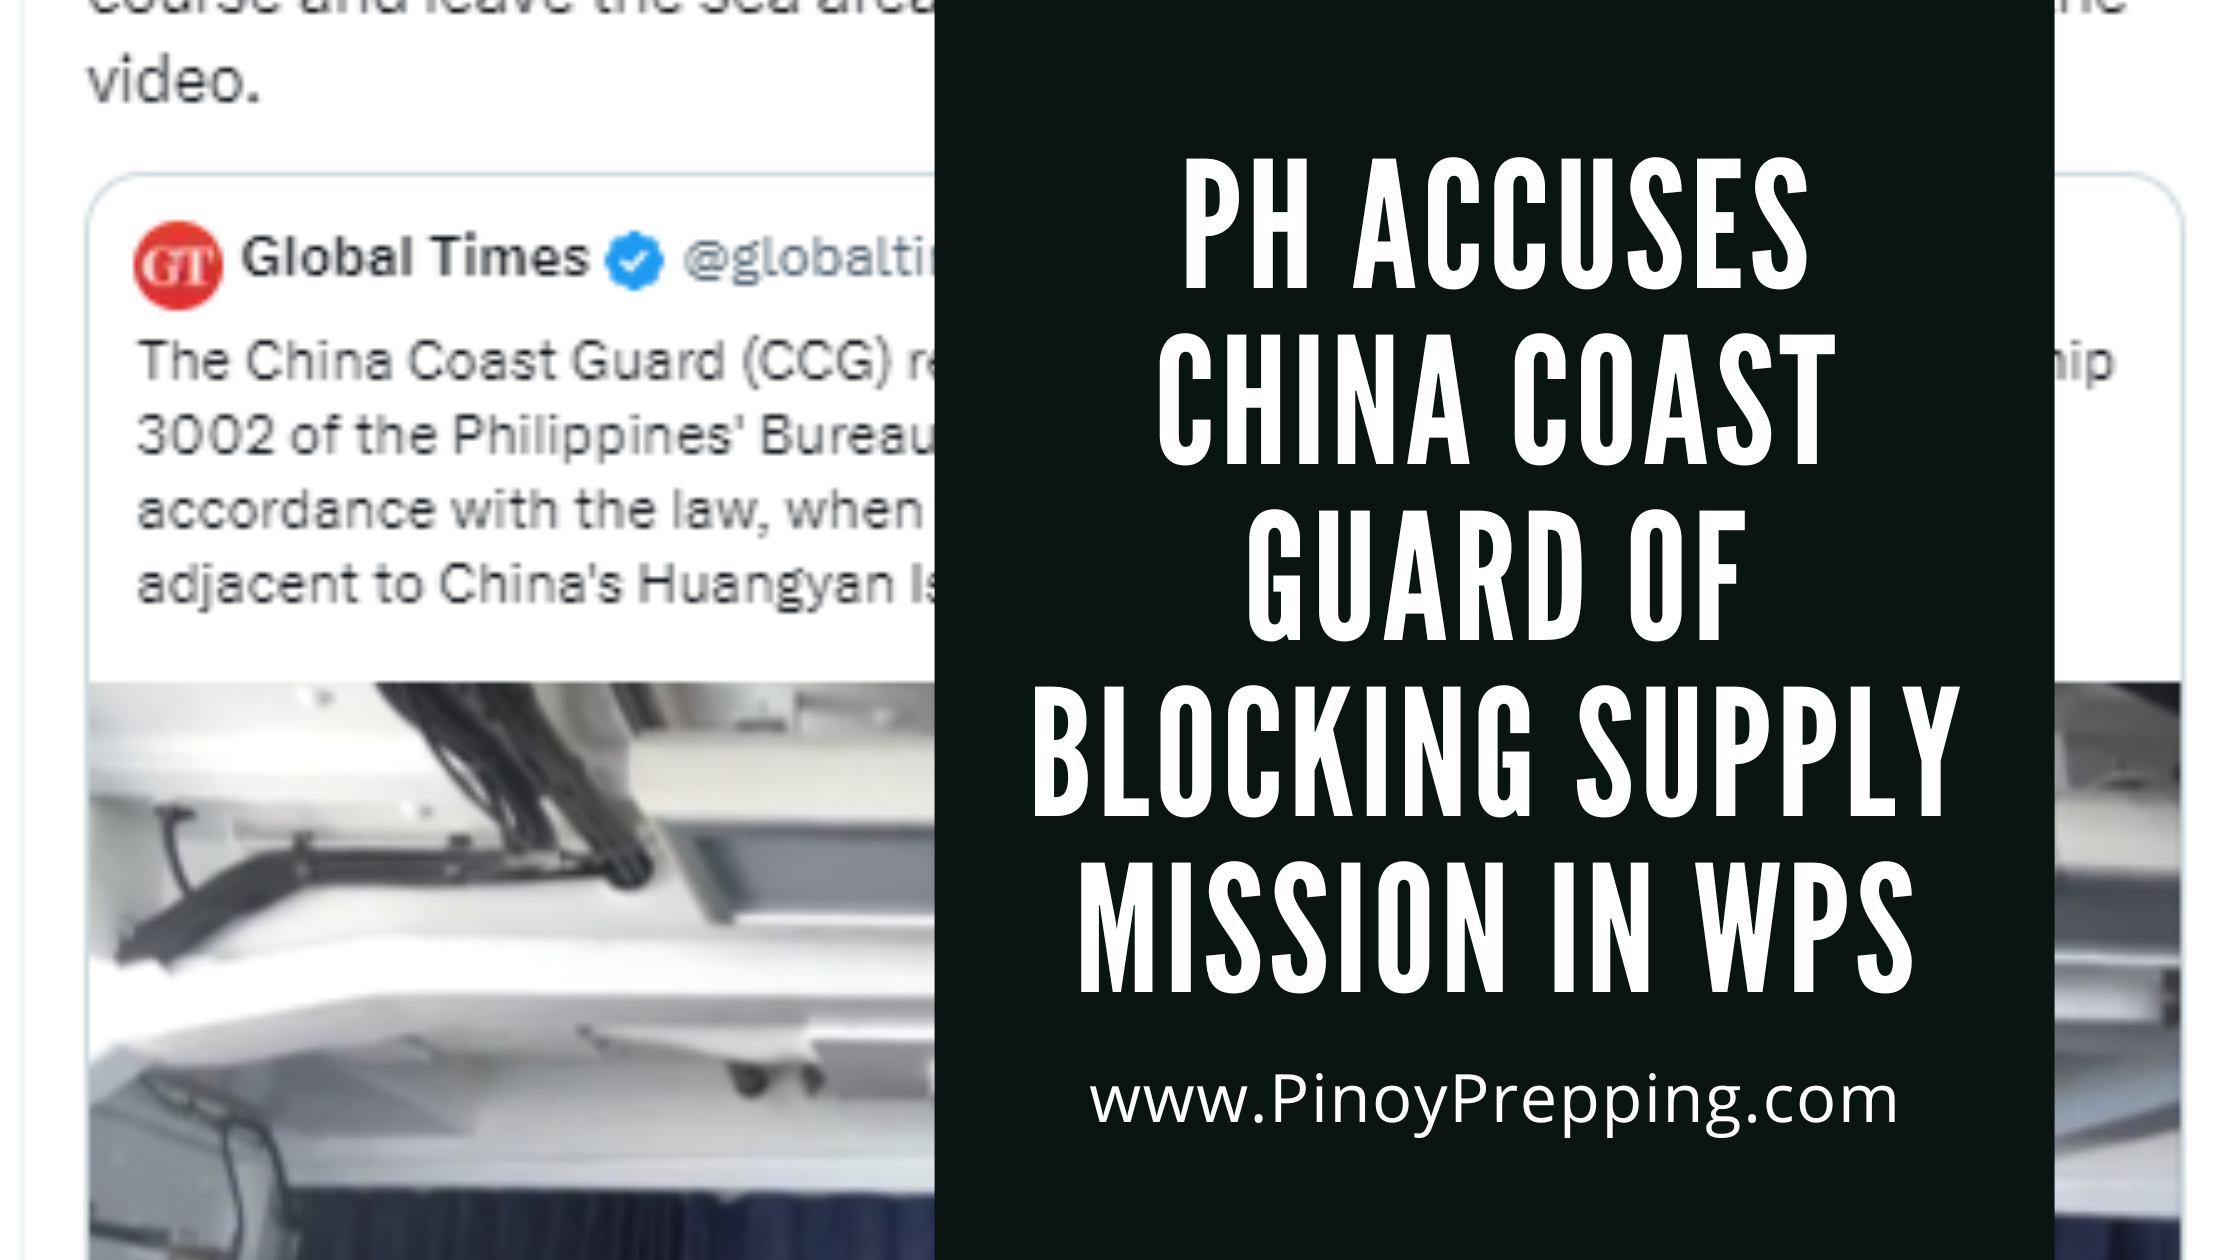 Philippines Accuses Chinese Coast Guard of Blocking Supply Mission in WPS